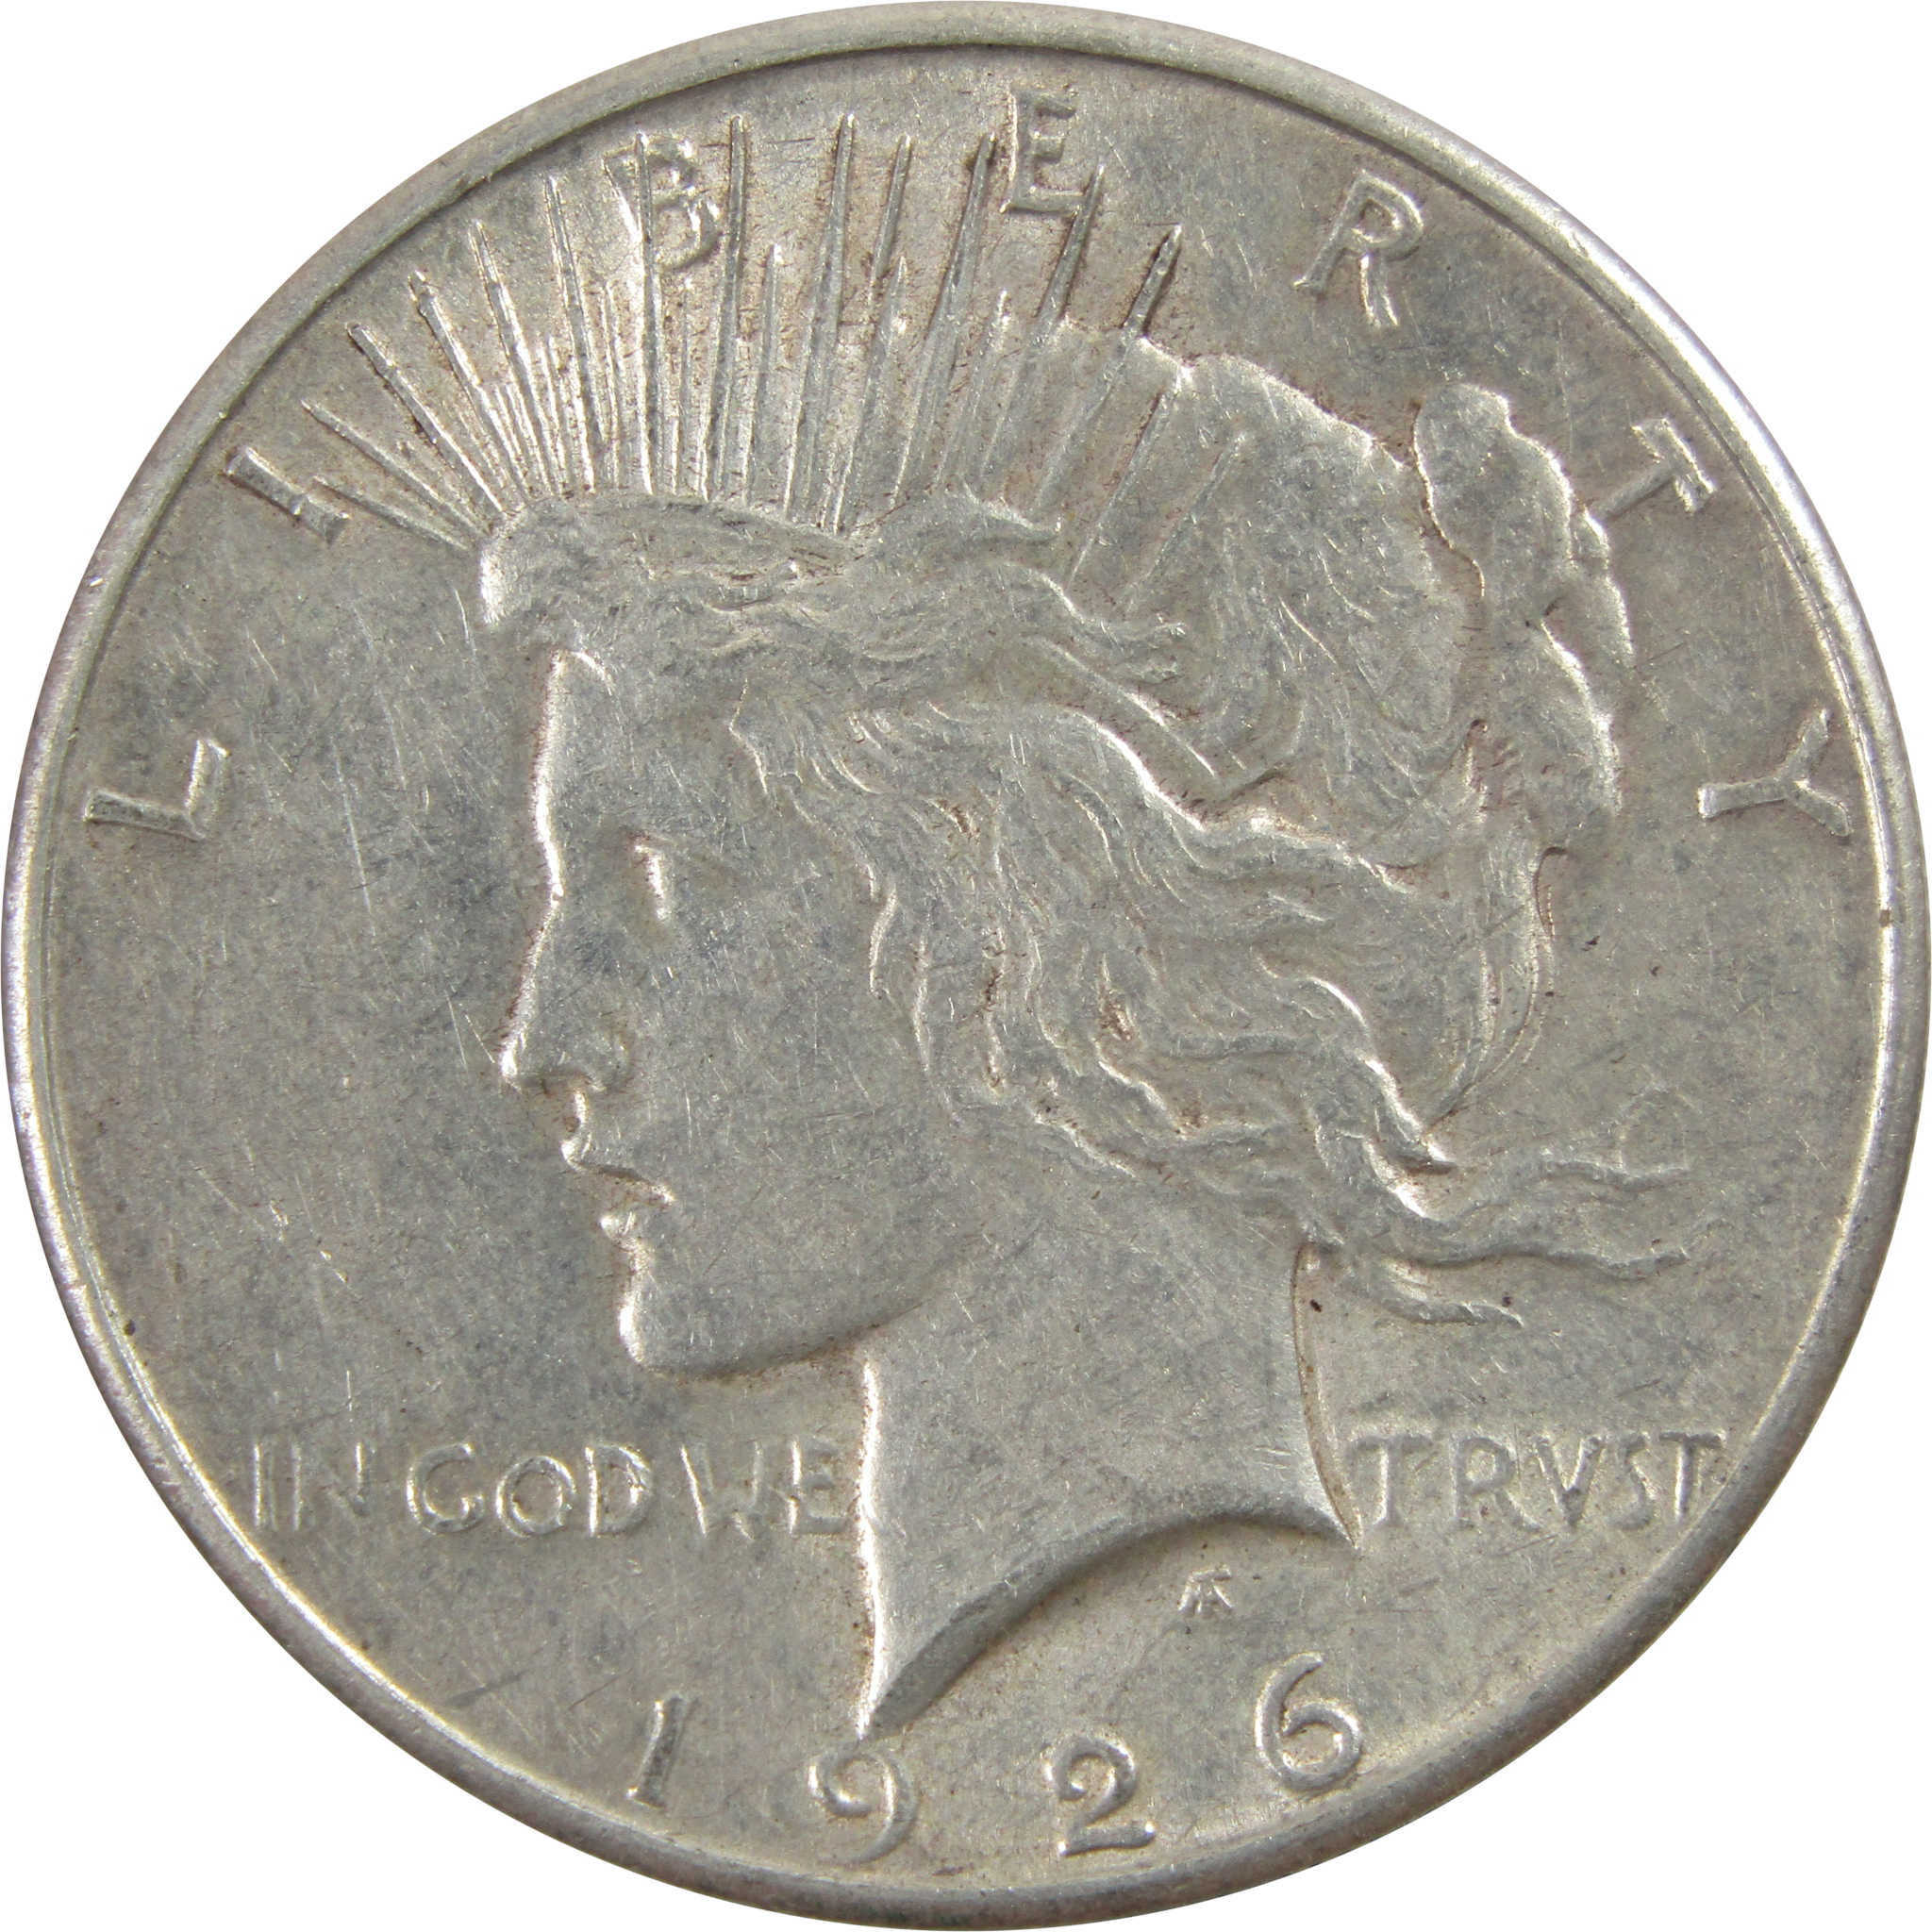 1926 S Peace Dollar XF EF Extremely Fine 90% Silver $1 Coin SKU:I5413